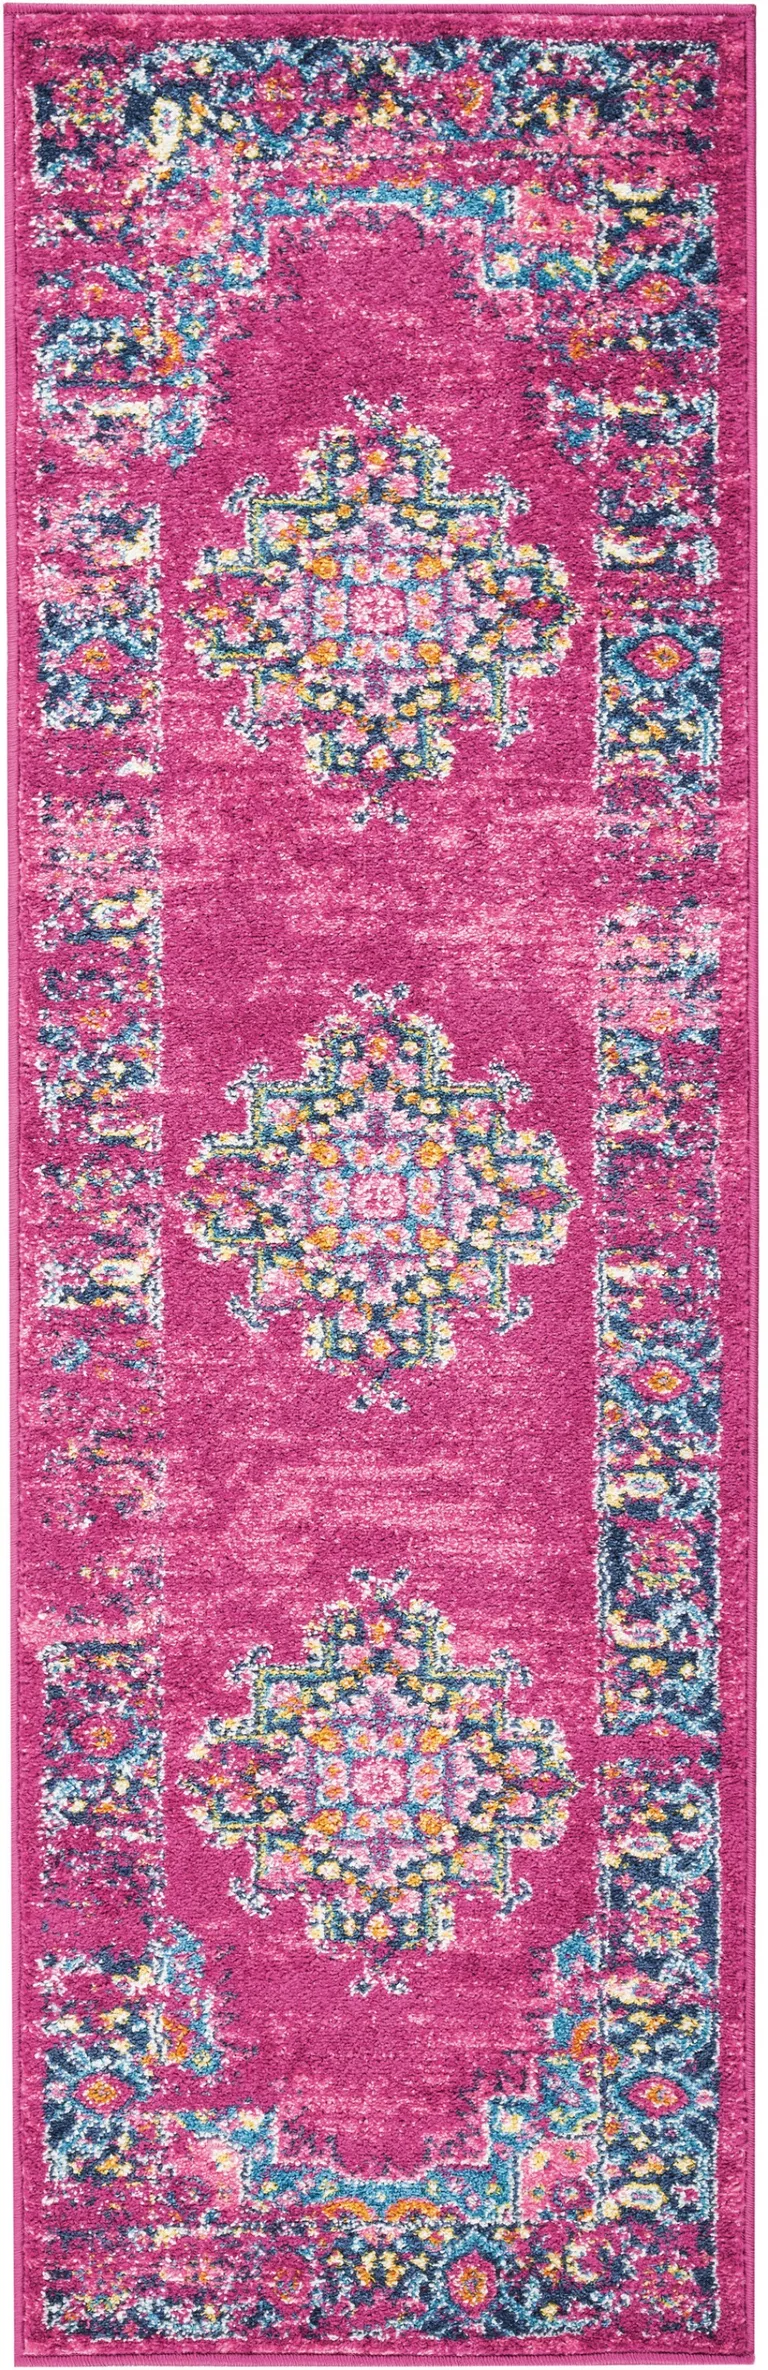 Fuchsia and Blue Distressed Runner Rug Photo 2